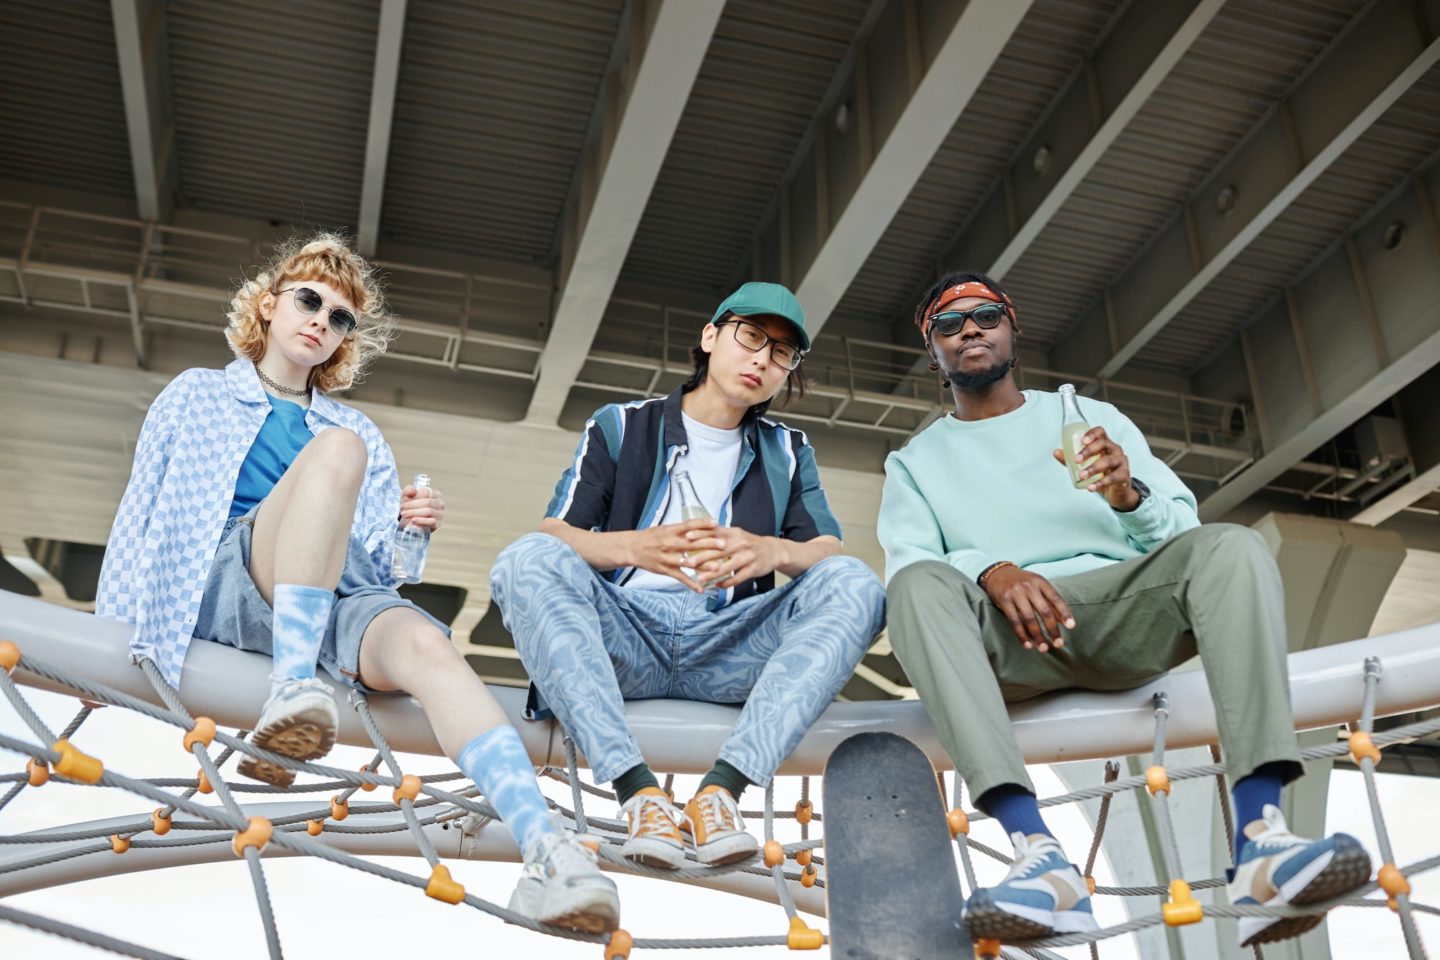 Diverse group of three young people hanging out in urban setting